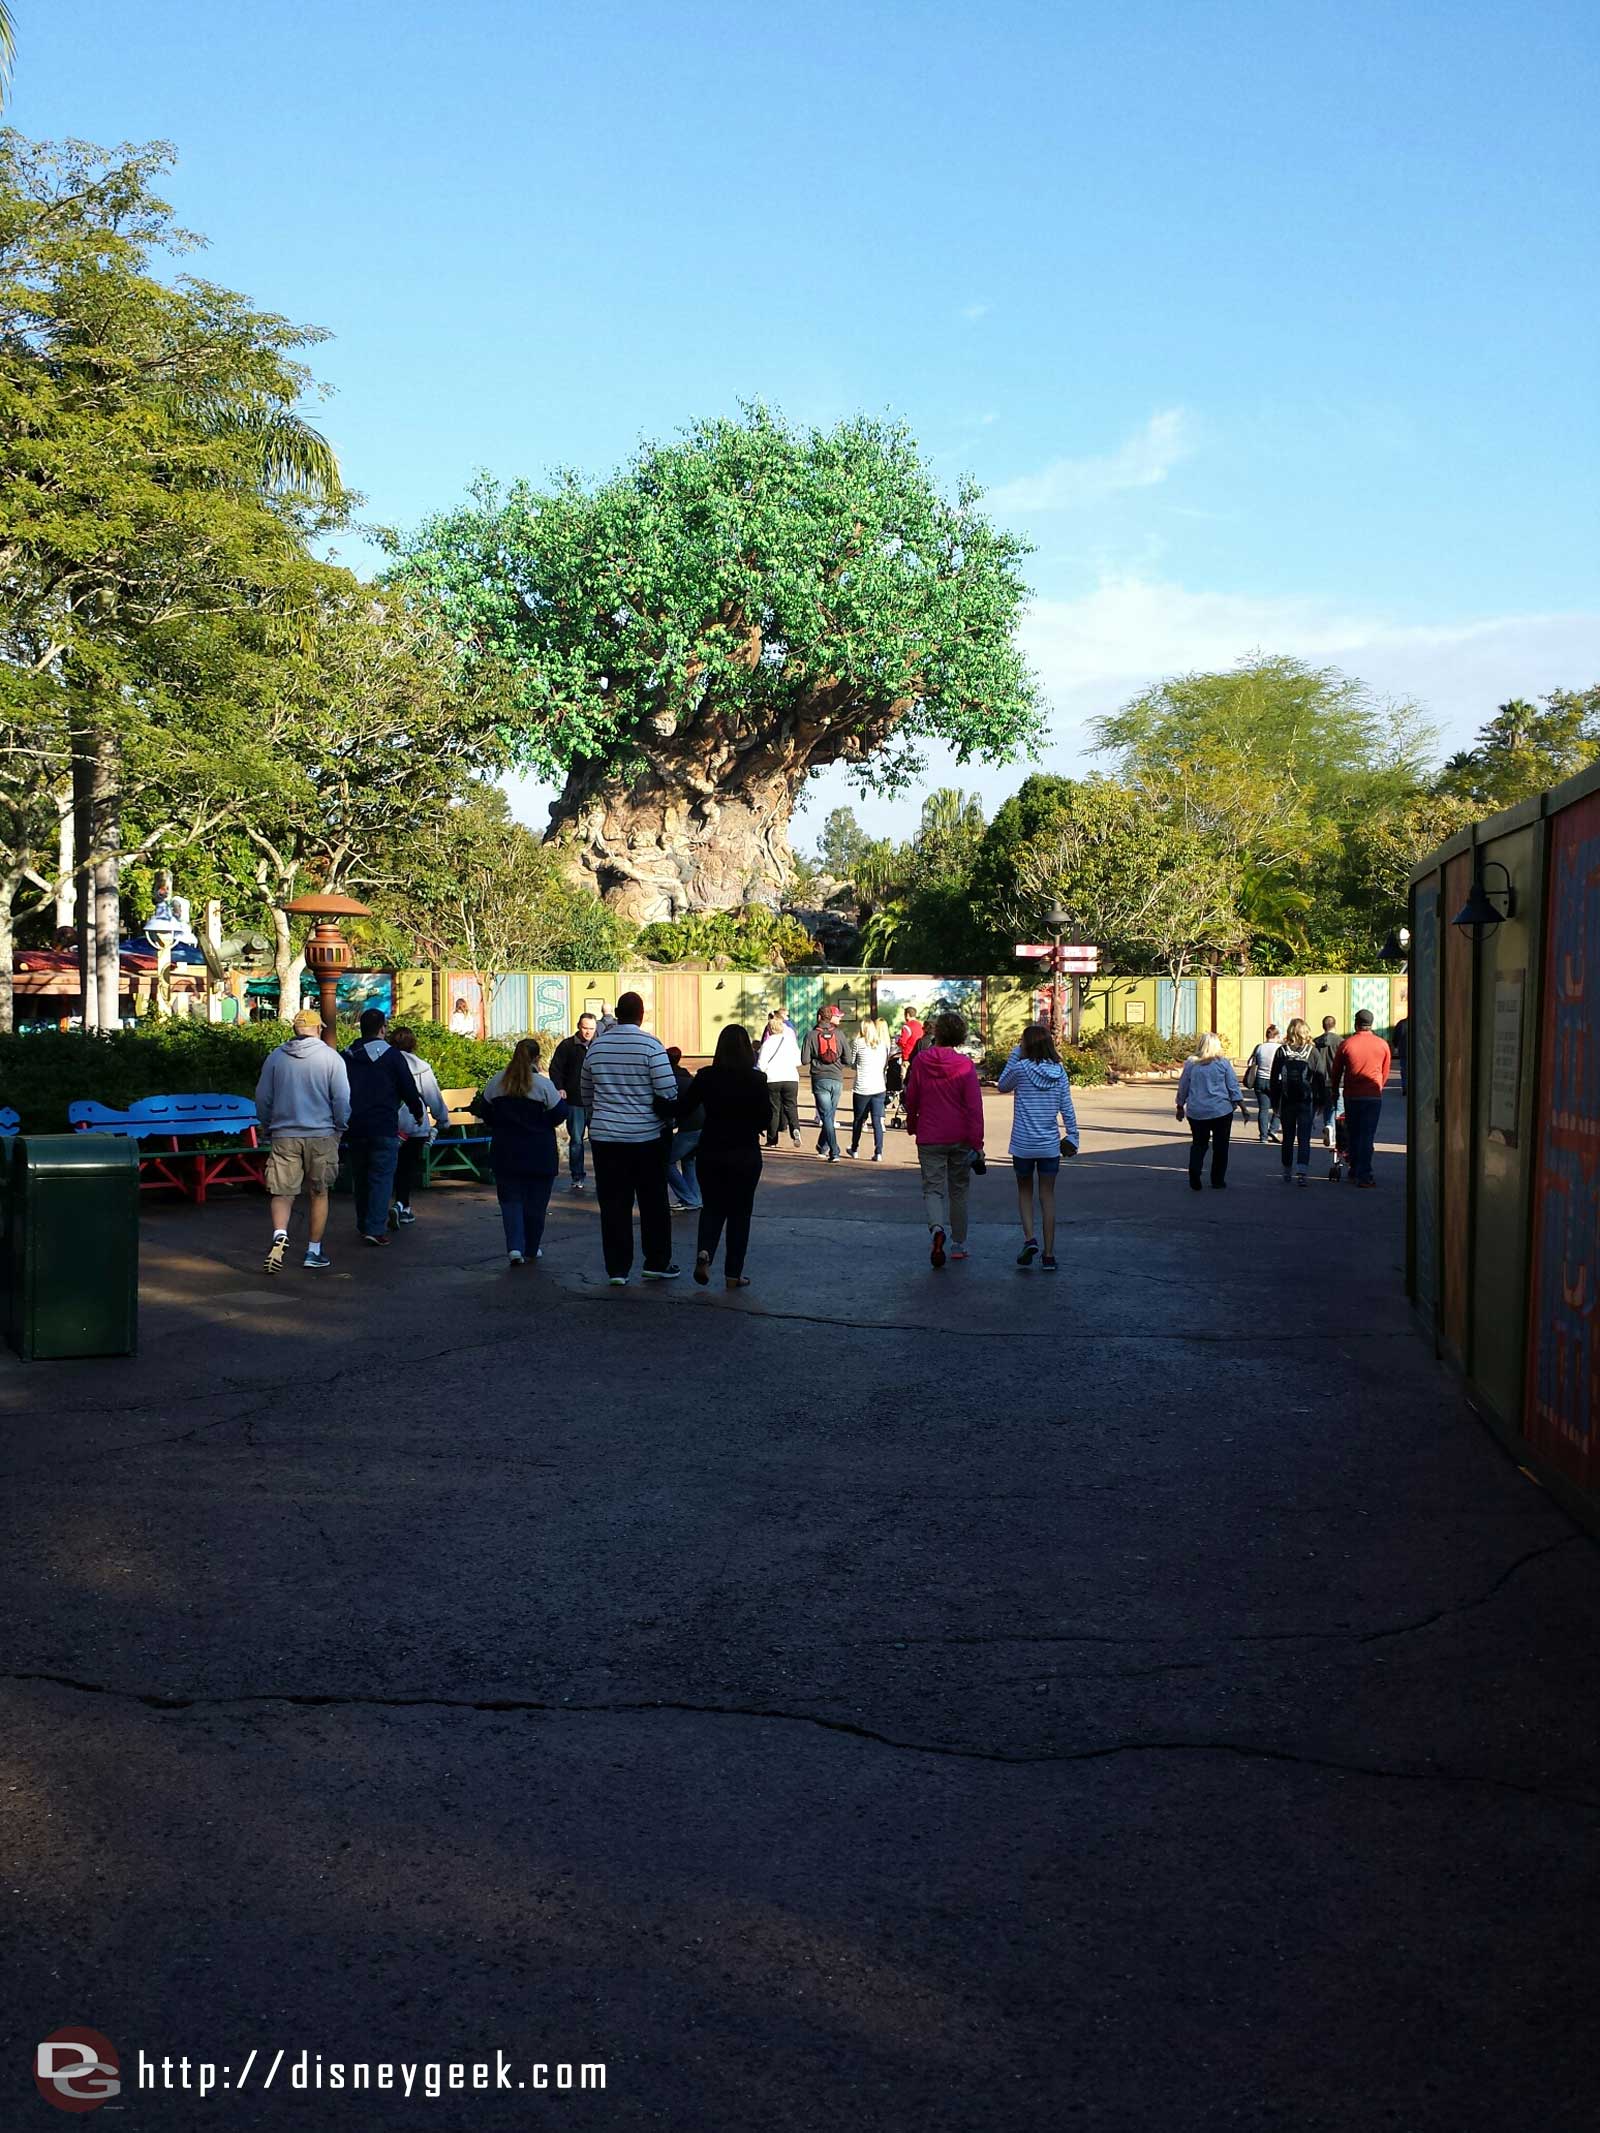 A much more pleasant day at the Animal Kingdom today compared to Monday. Clear skies but cool to cold temperatures.